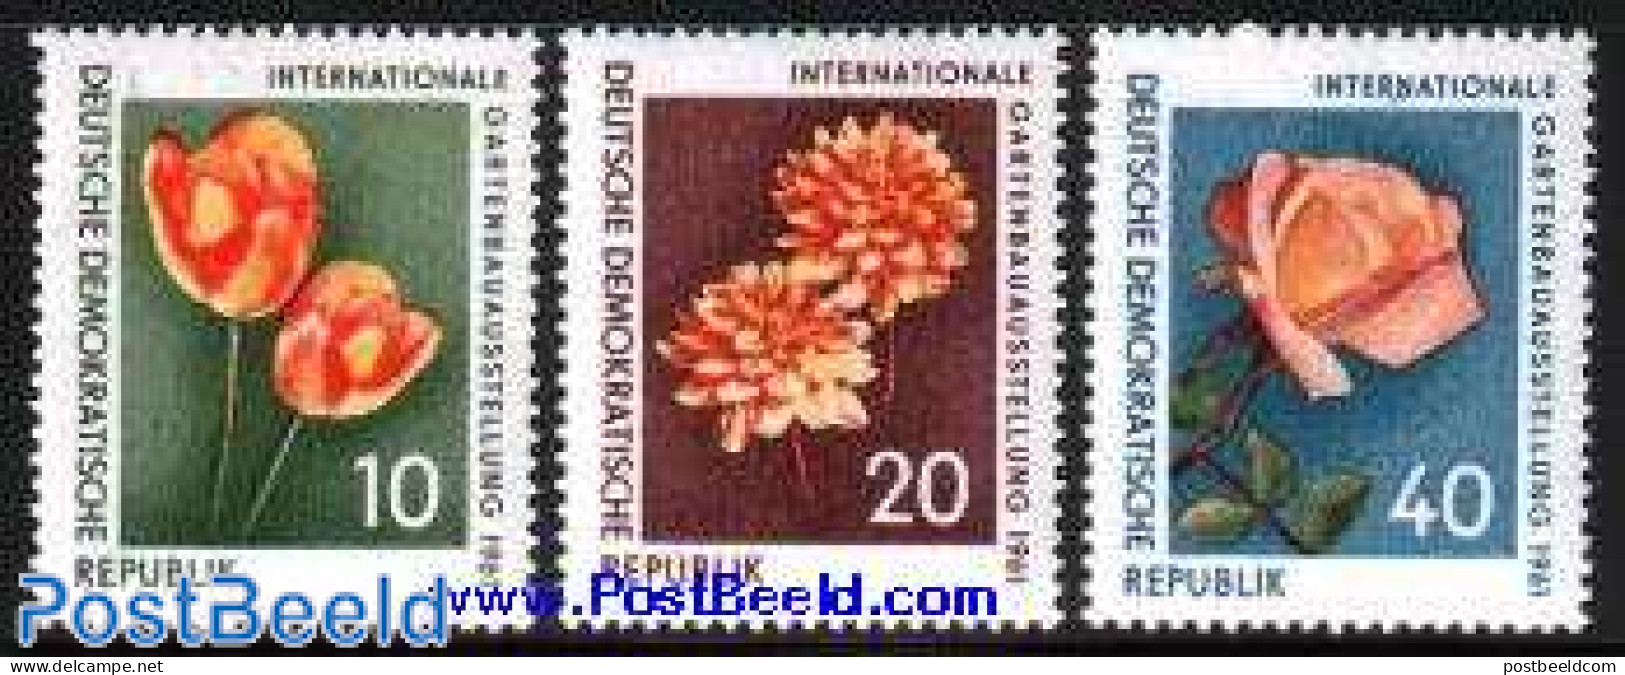 Germany, DDR 1961 Garden Expo 3v, Mint NH, Nature - Flowers & Plants - Gardens - Roses - Ungebraucht